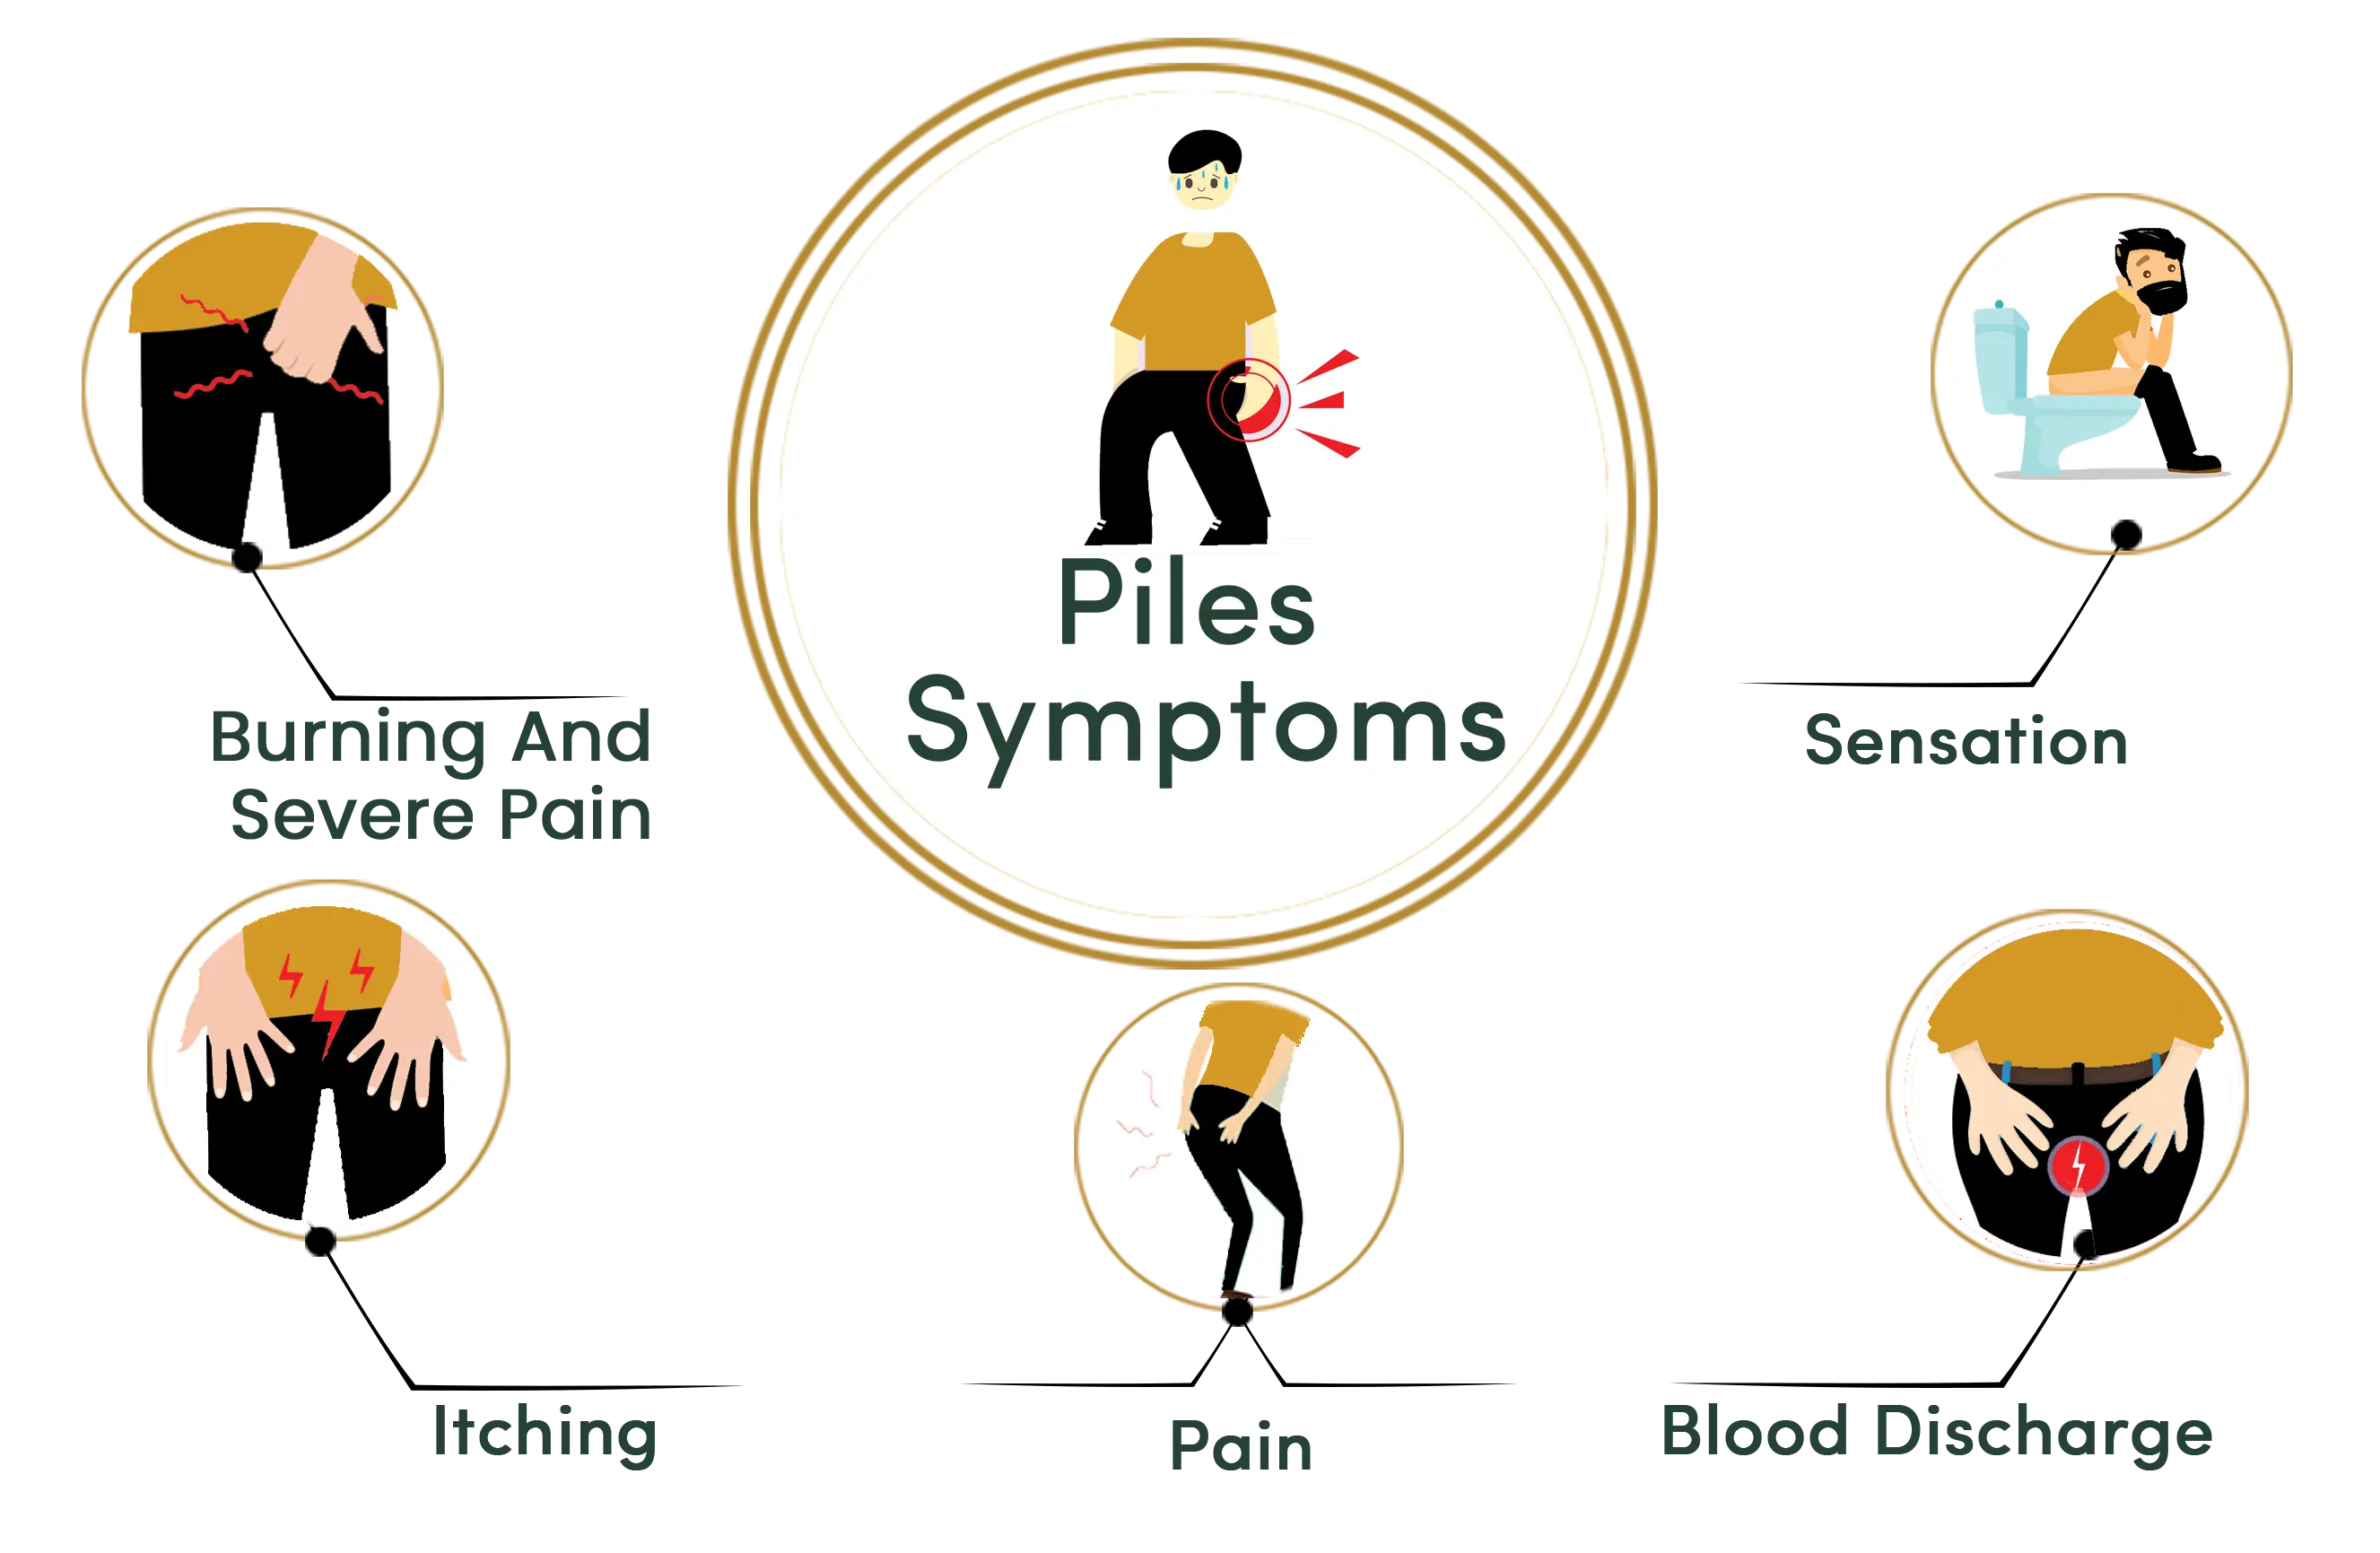 Common causes and symptoms of piles, and their treatment